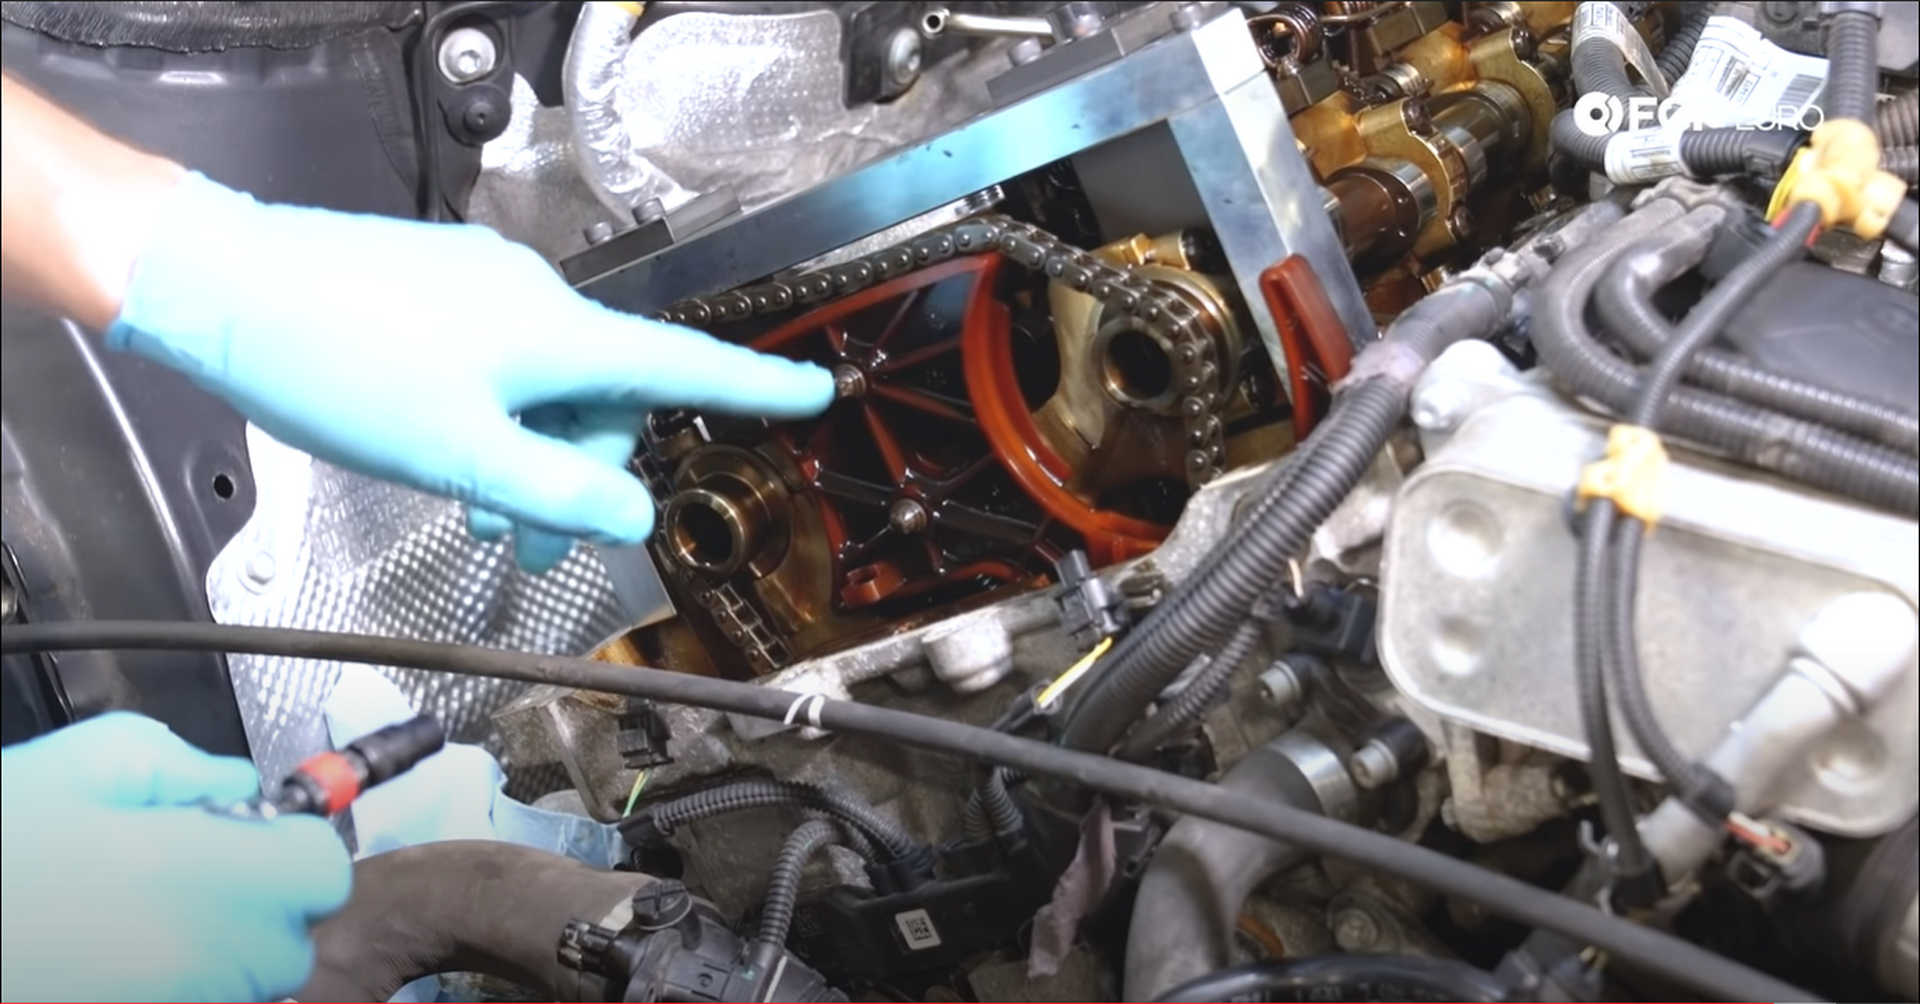 DIY BMW N20 Timing Chain removing the timing chain guide bolts